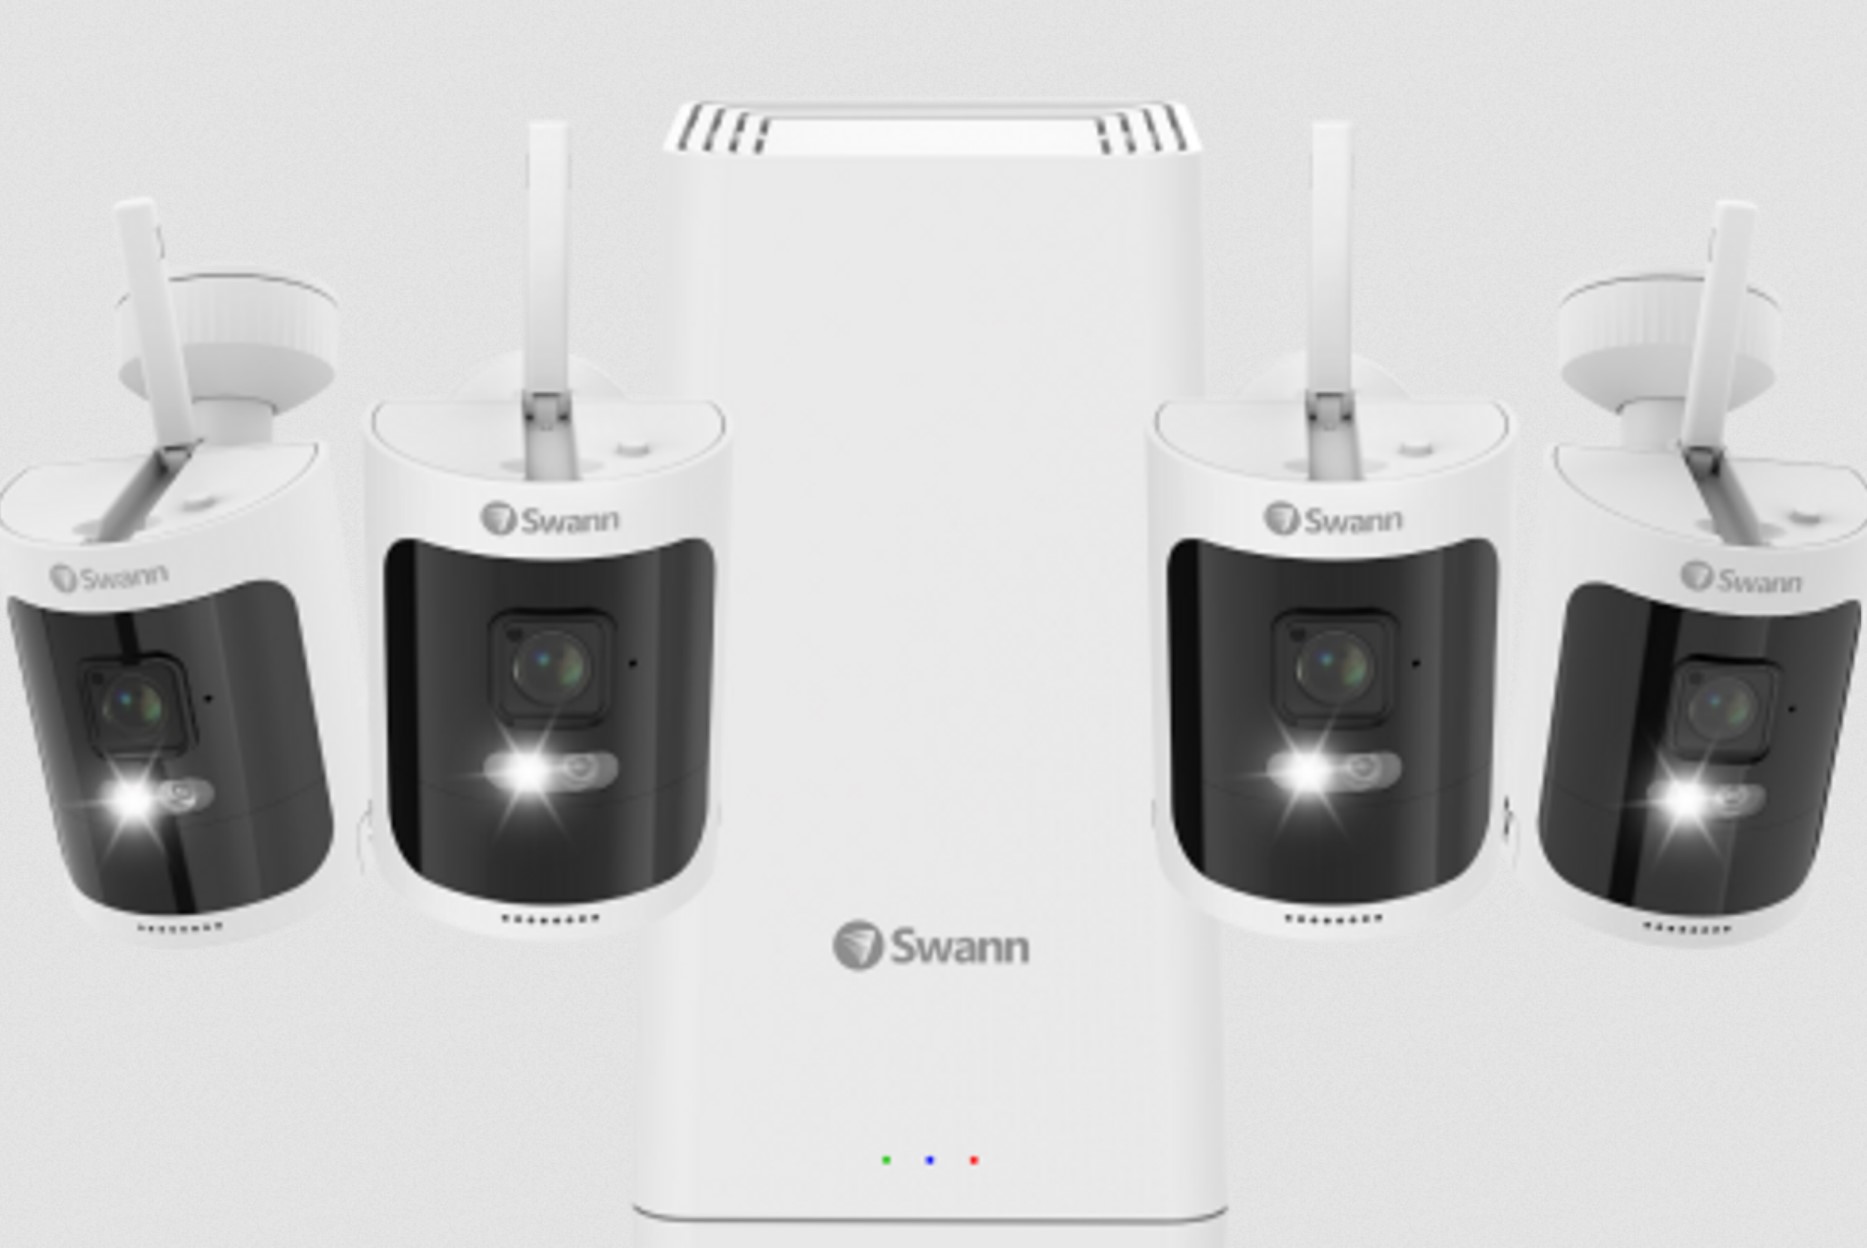 Swann  Home Security Camera Systems